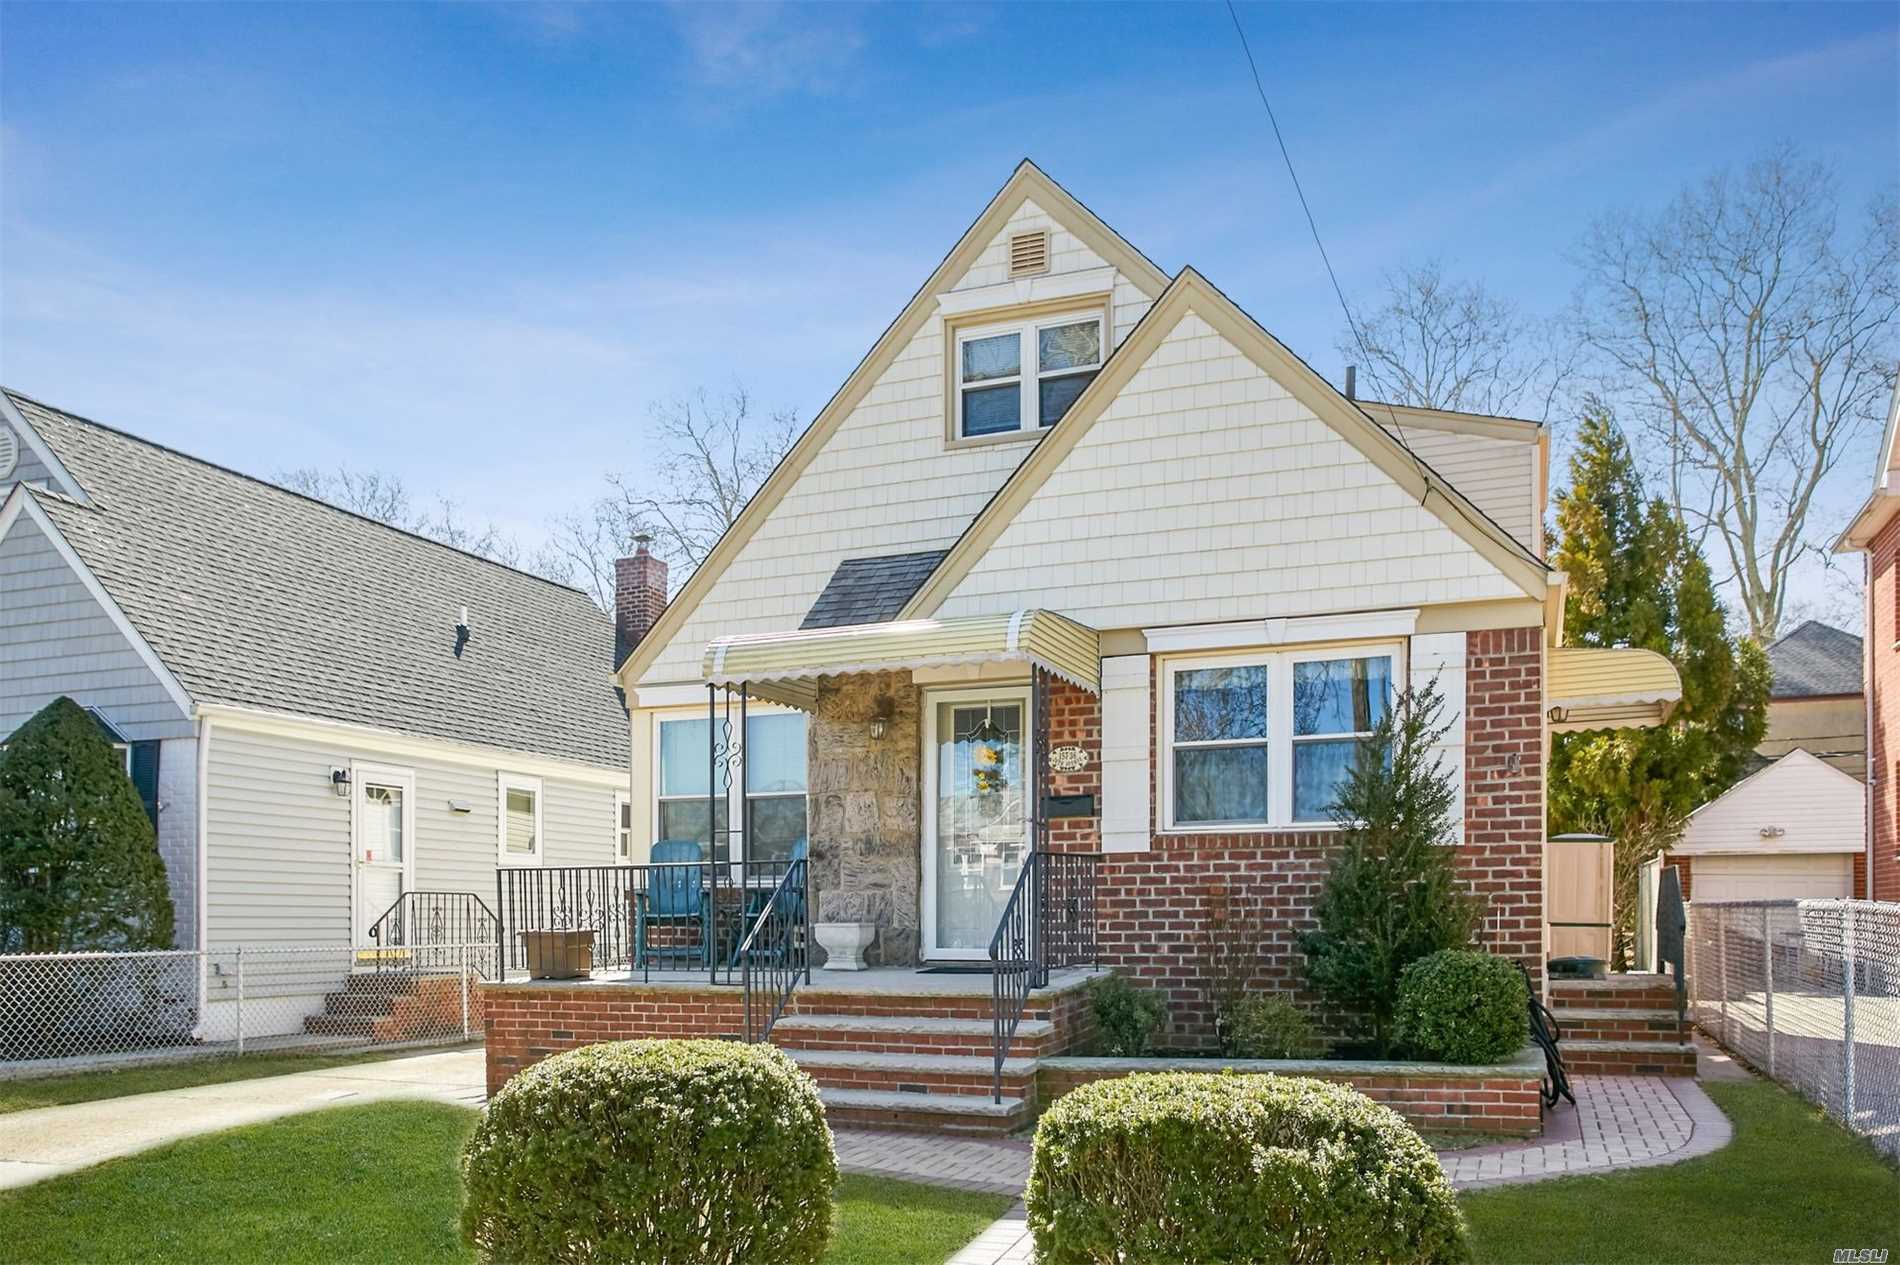 Bright, clean 4 BR, 2 full bath Cape in desirable area of Flushing North. Nice sized rooms, with two beautiful baths, meticulously cared for, move right in! Spacious yard, 3 car driveway, near shopping & transportation.